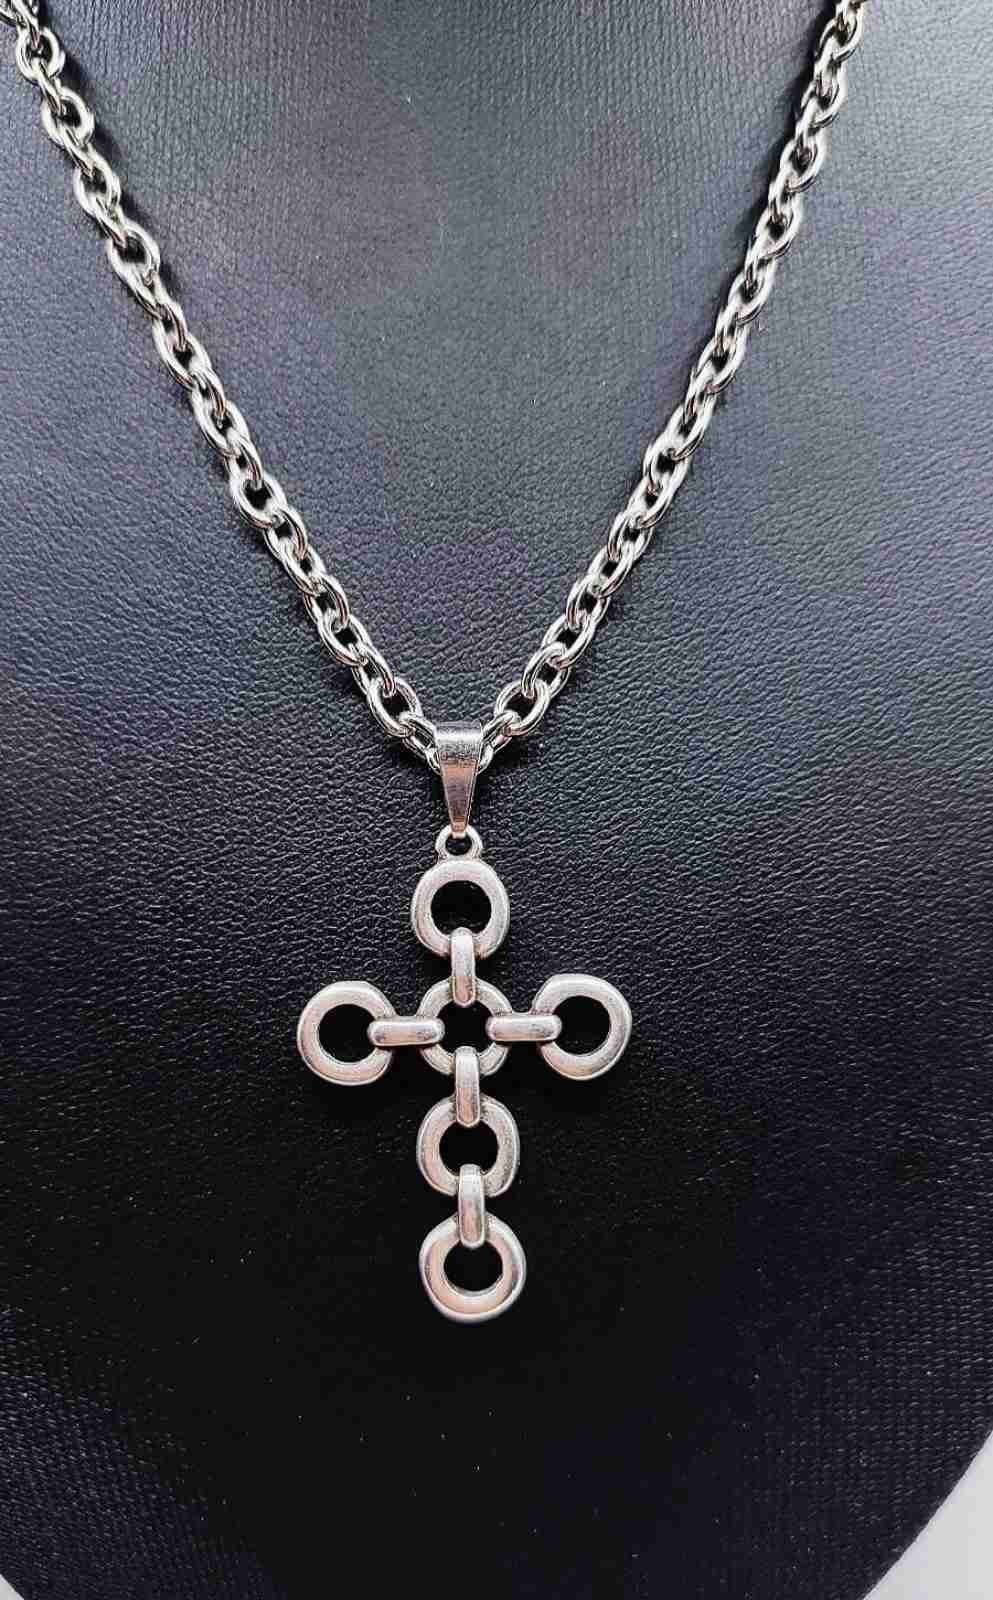 NECKLACE WITH A SILVER CROSS